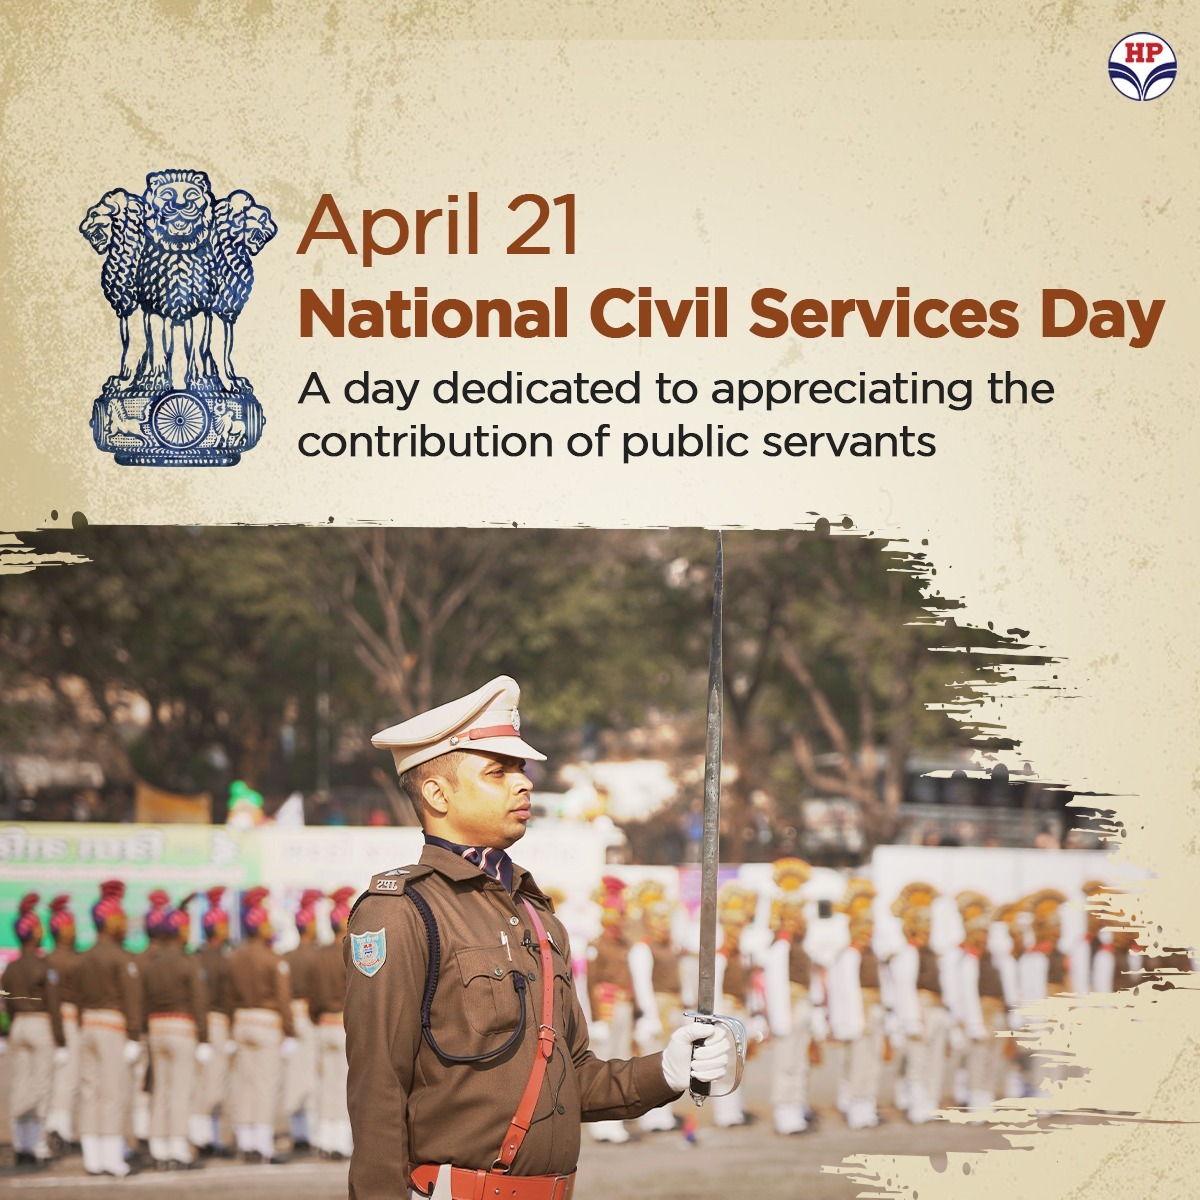 April 21st is National Civil Services Day, honouring public servants' dedication. Their tireless work in managing public affairs and ensuring safety is invaluable. HP Retail thanks them for their commitment to our nation. #HPRetail #MeraHPPump @HPCL #CivilServices